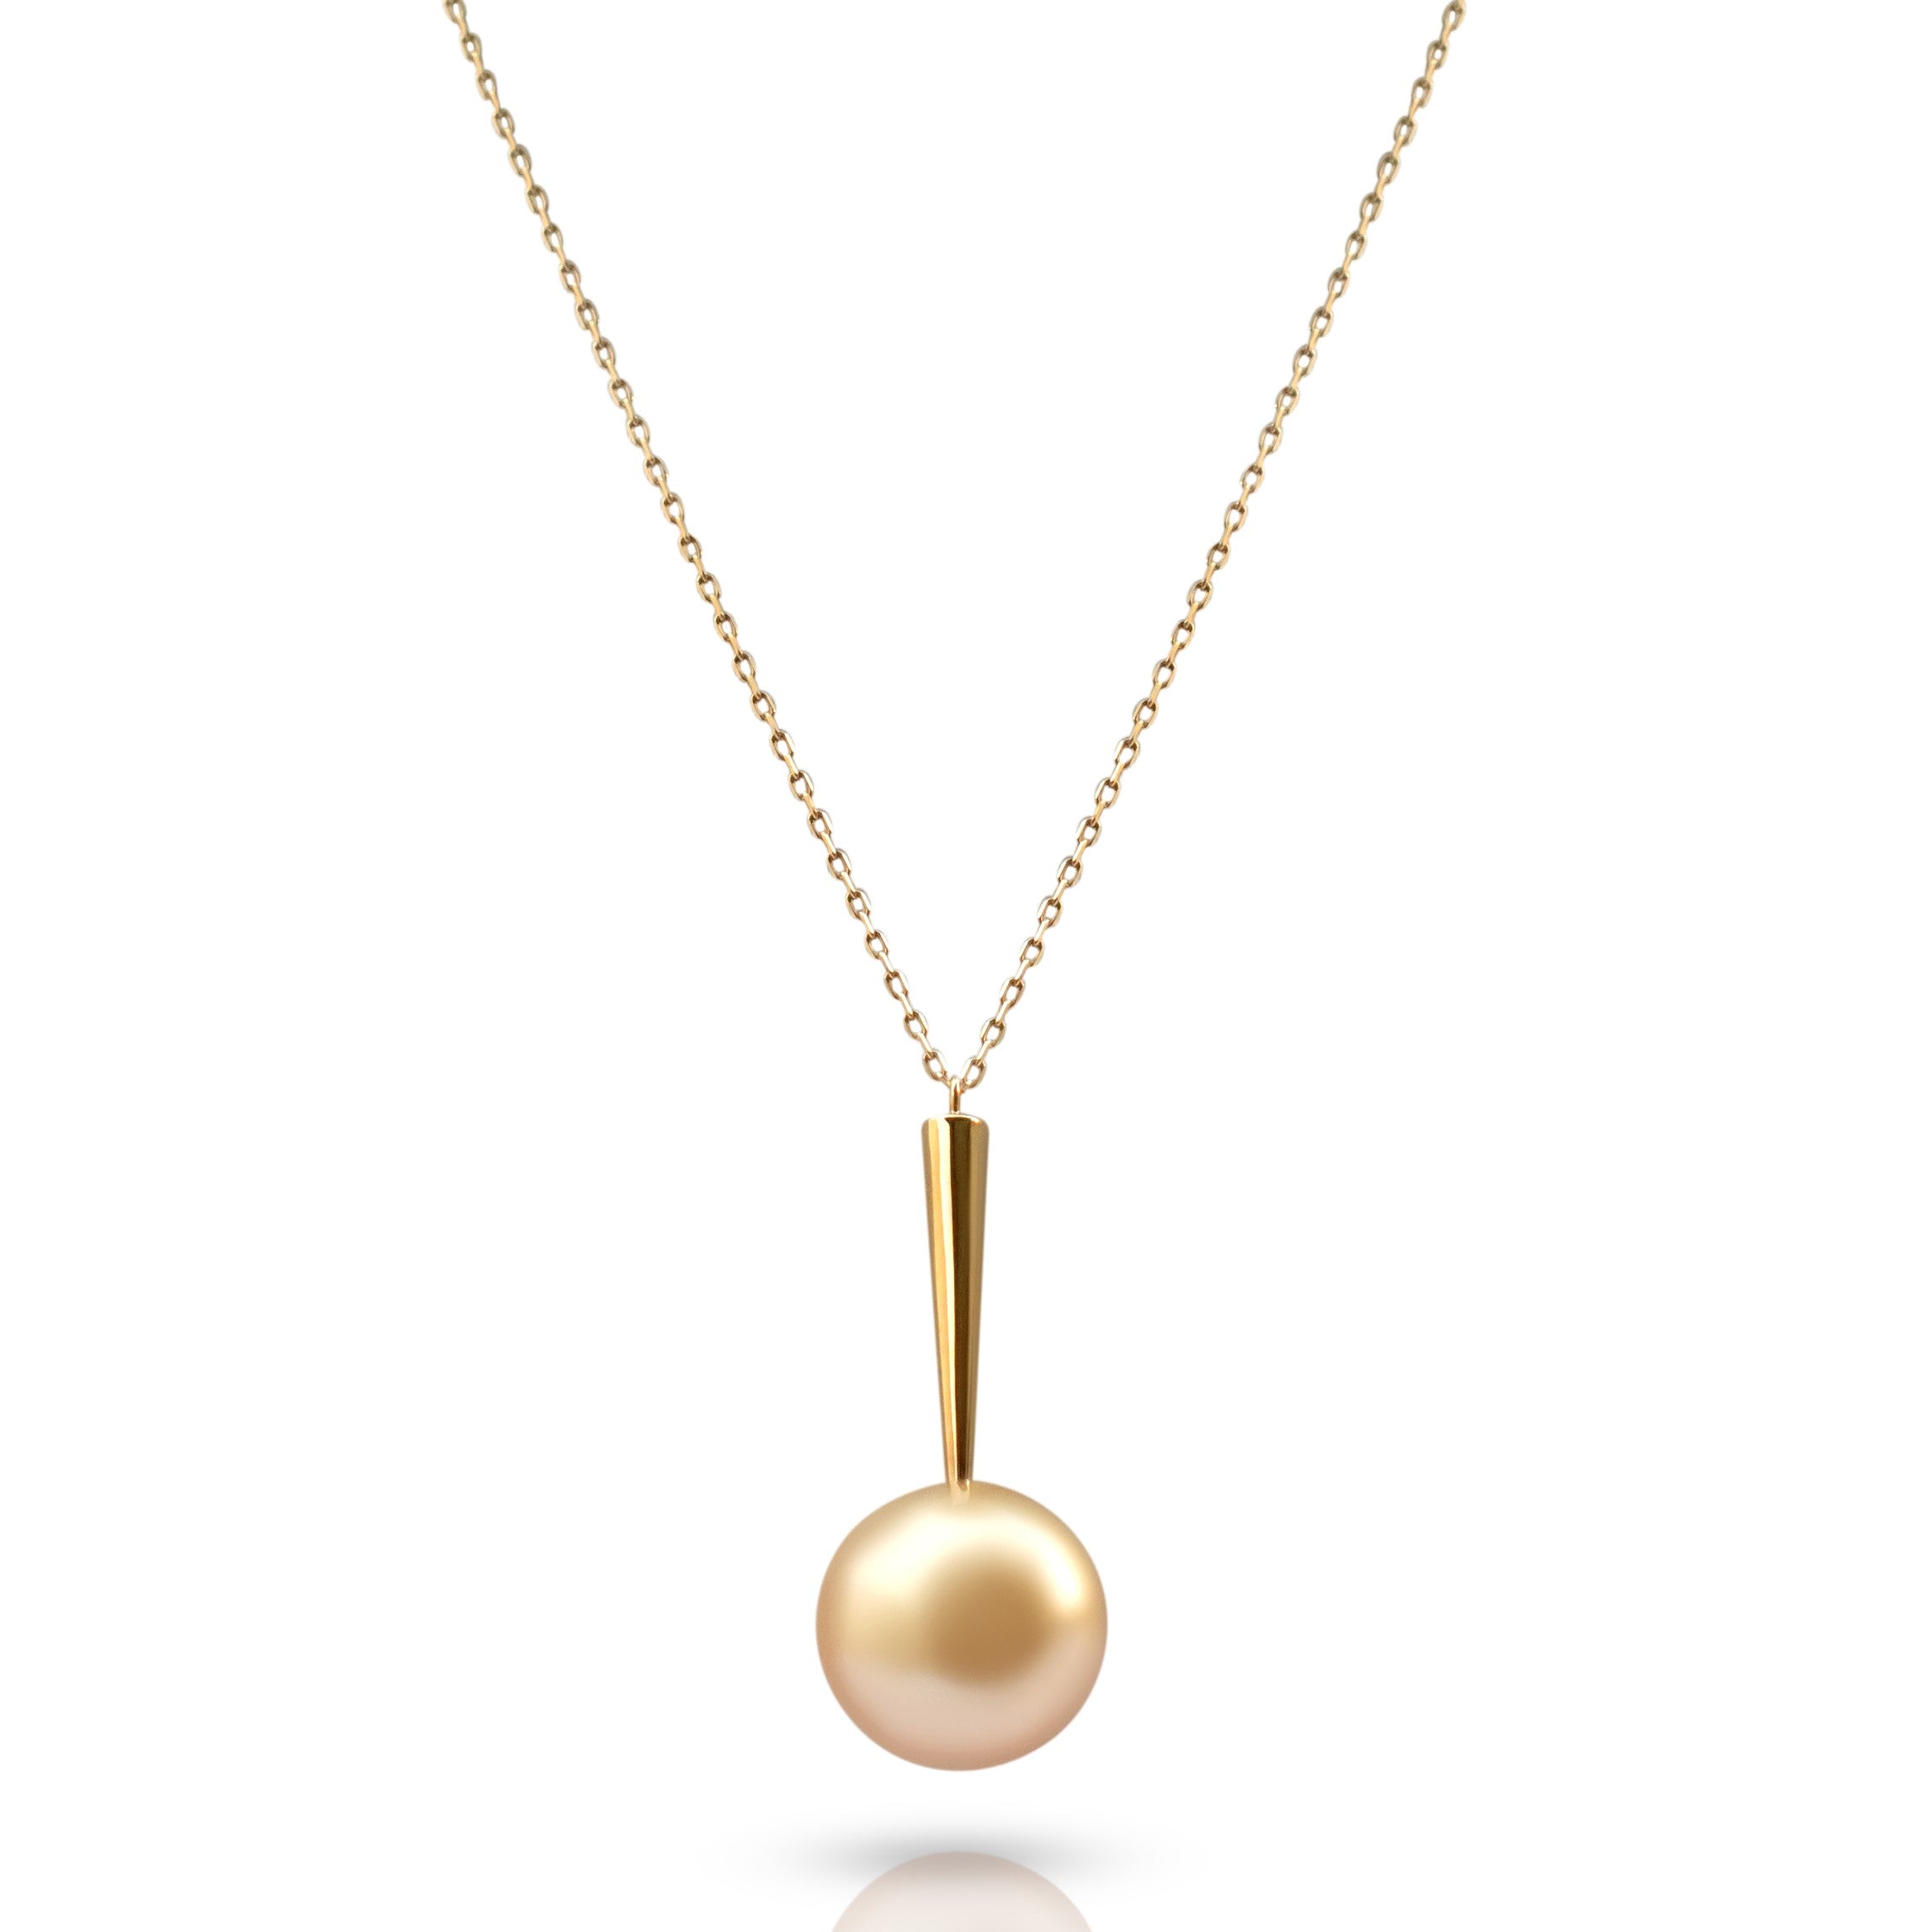 Golden South Sea Pearl Pendant Necklace set  in 18K Yellow Gold